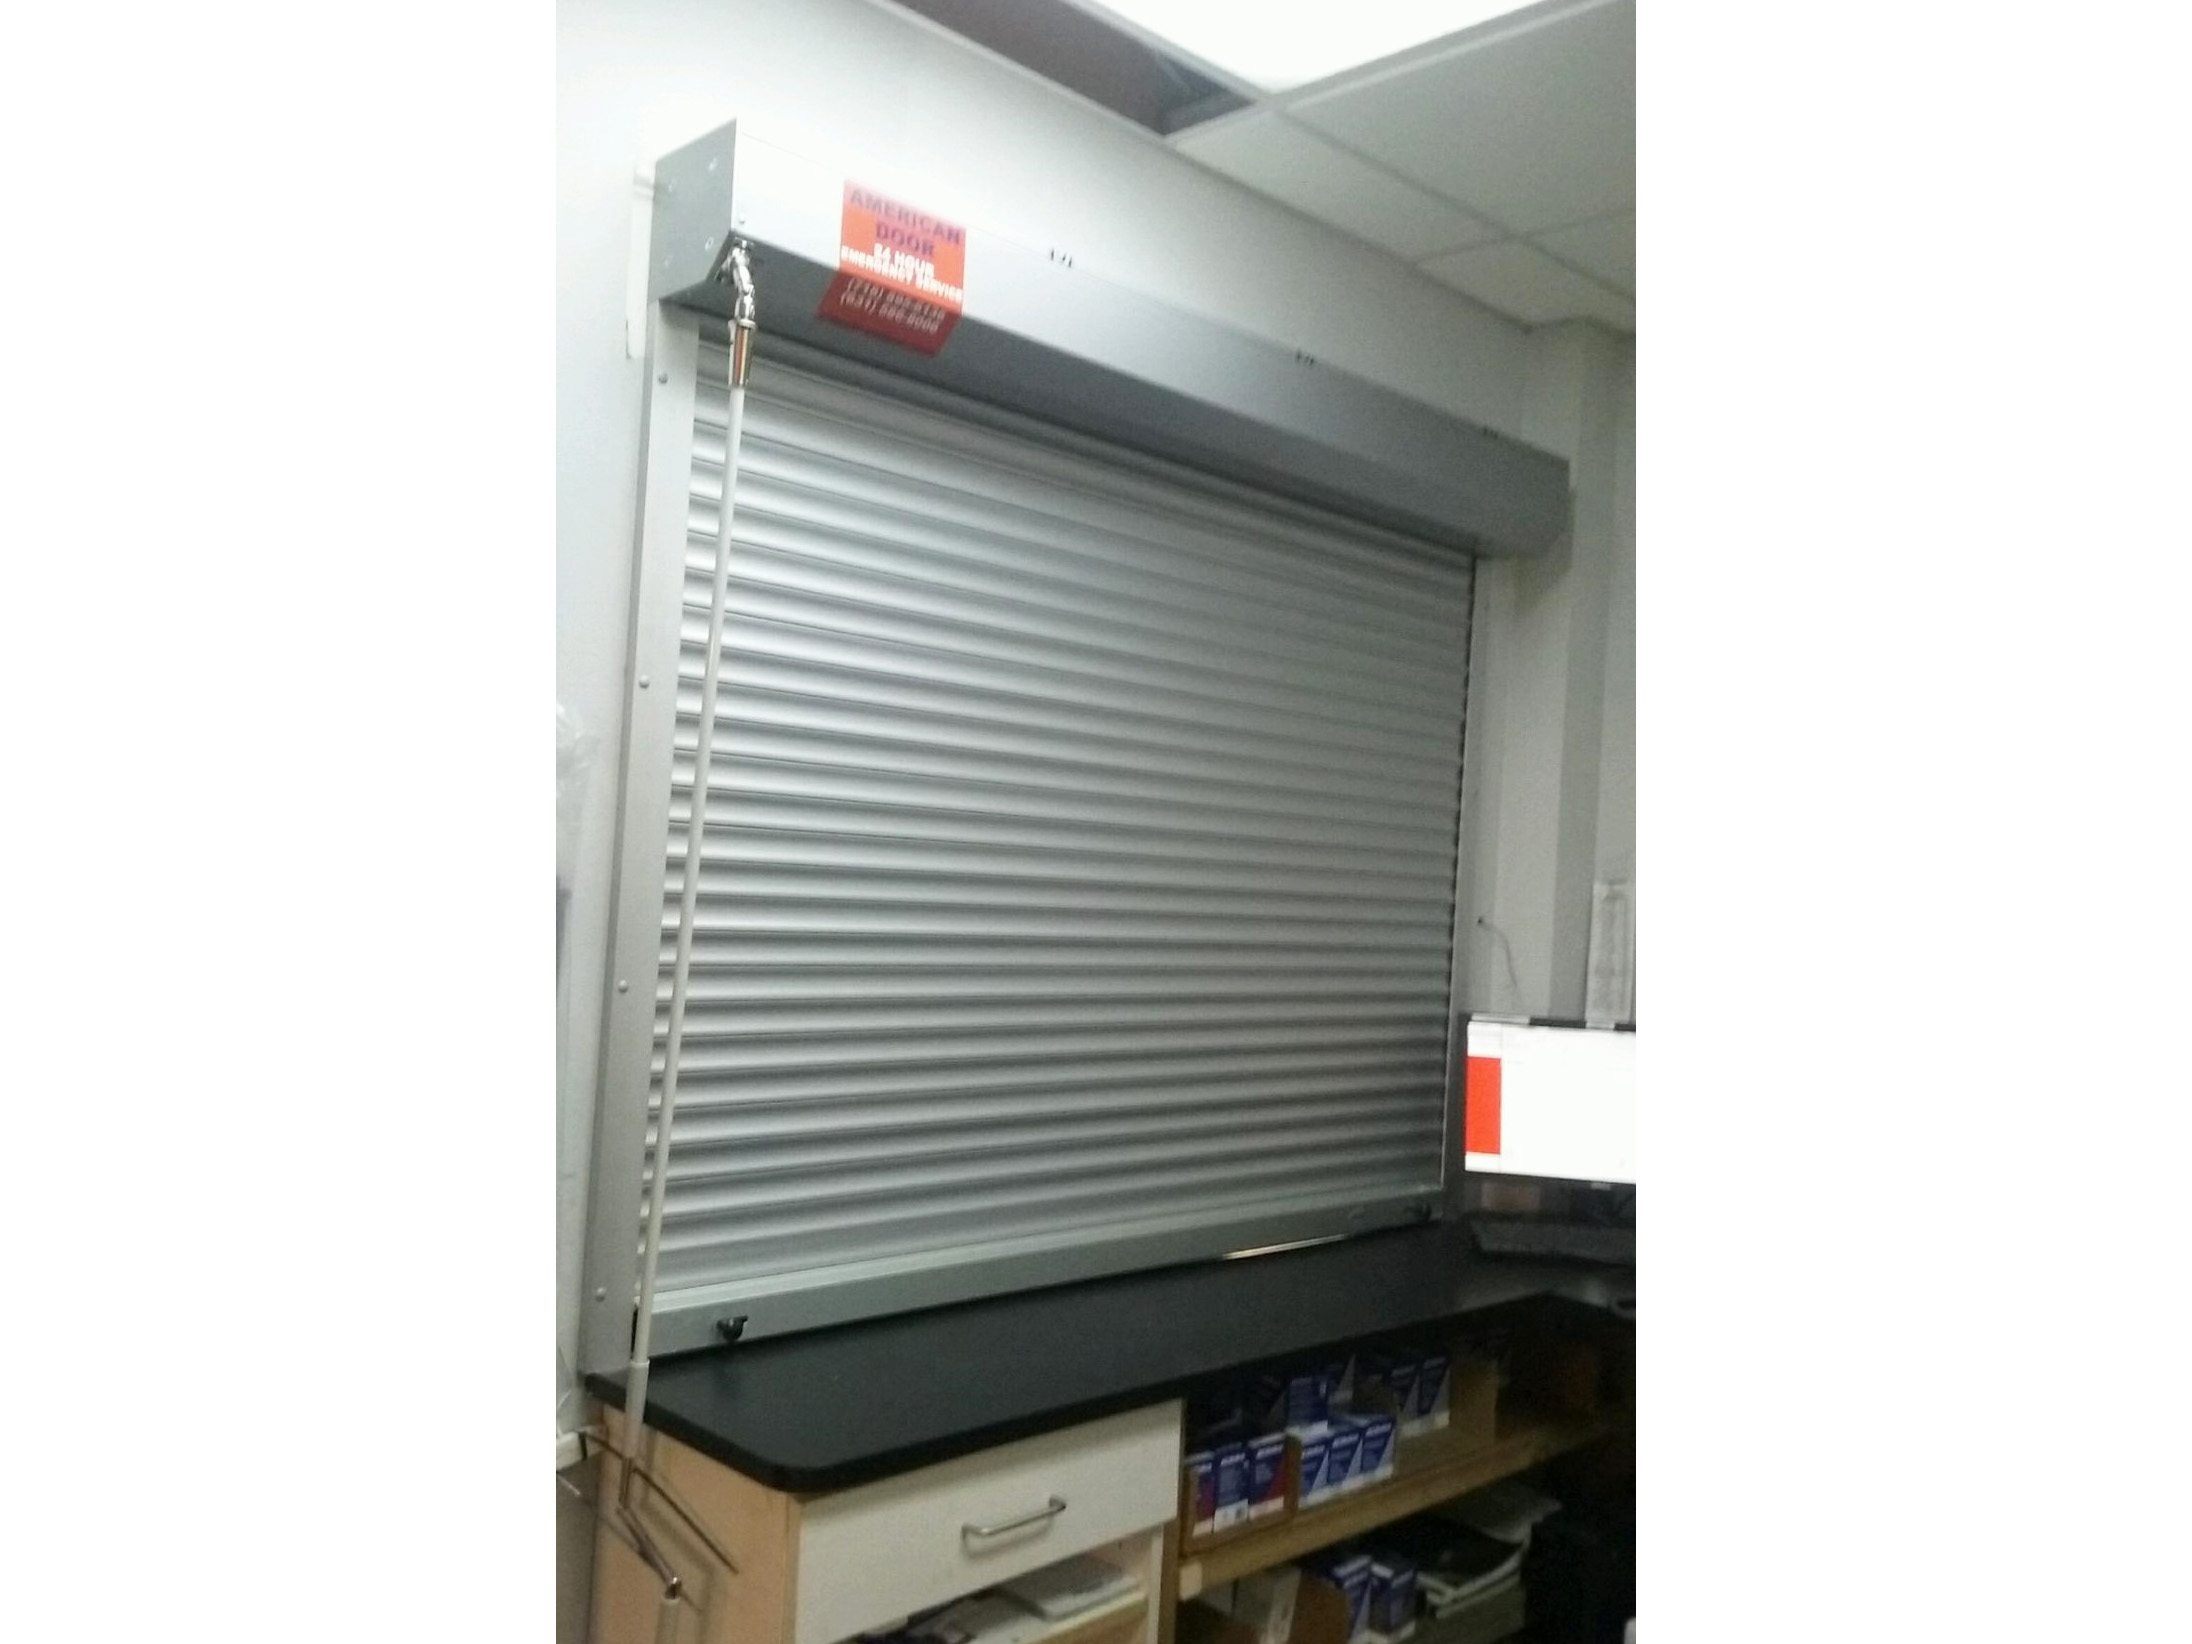 Counter rolling shutter - Chevy